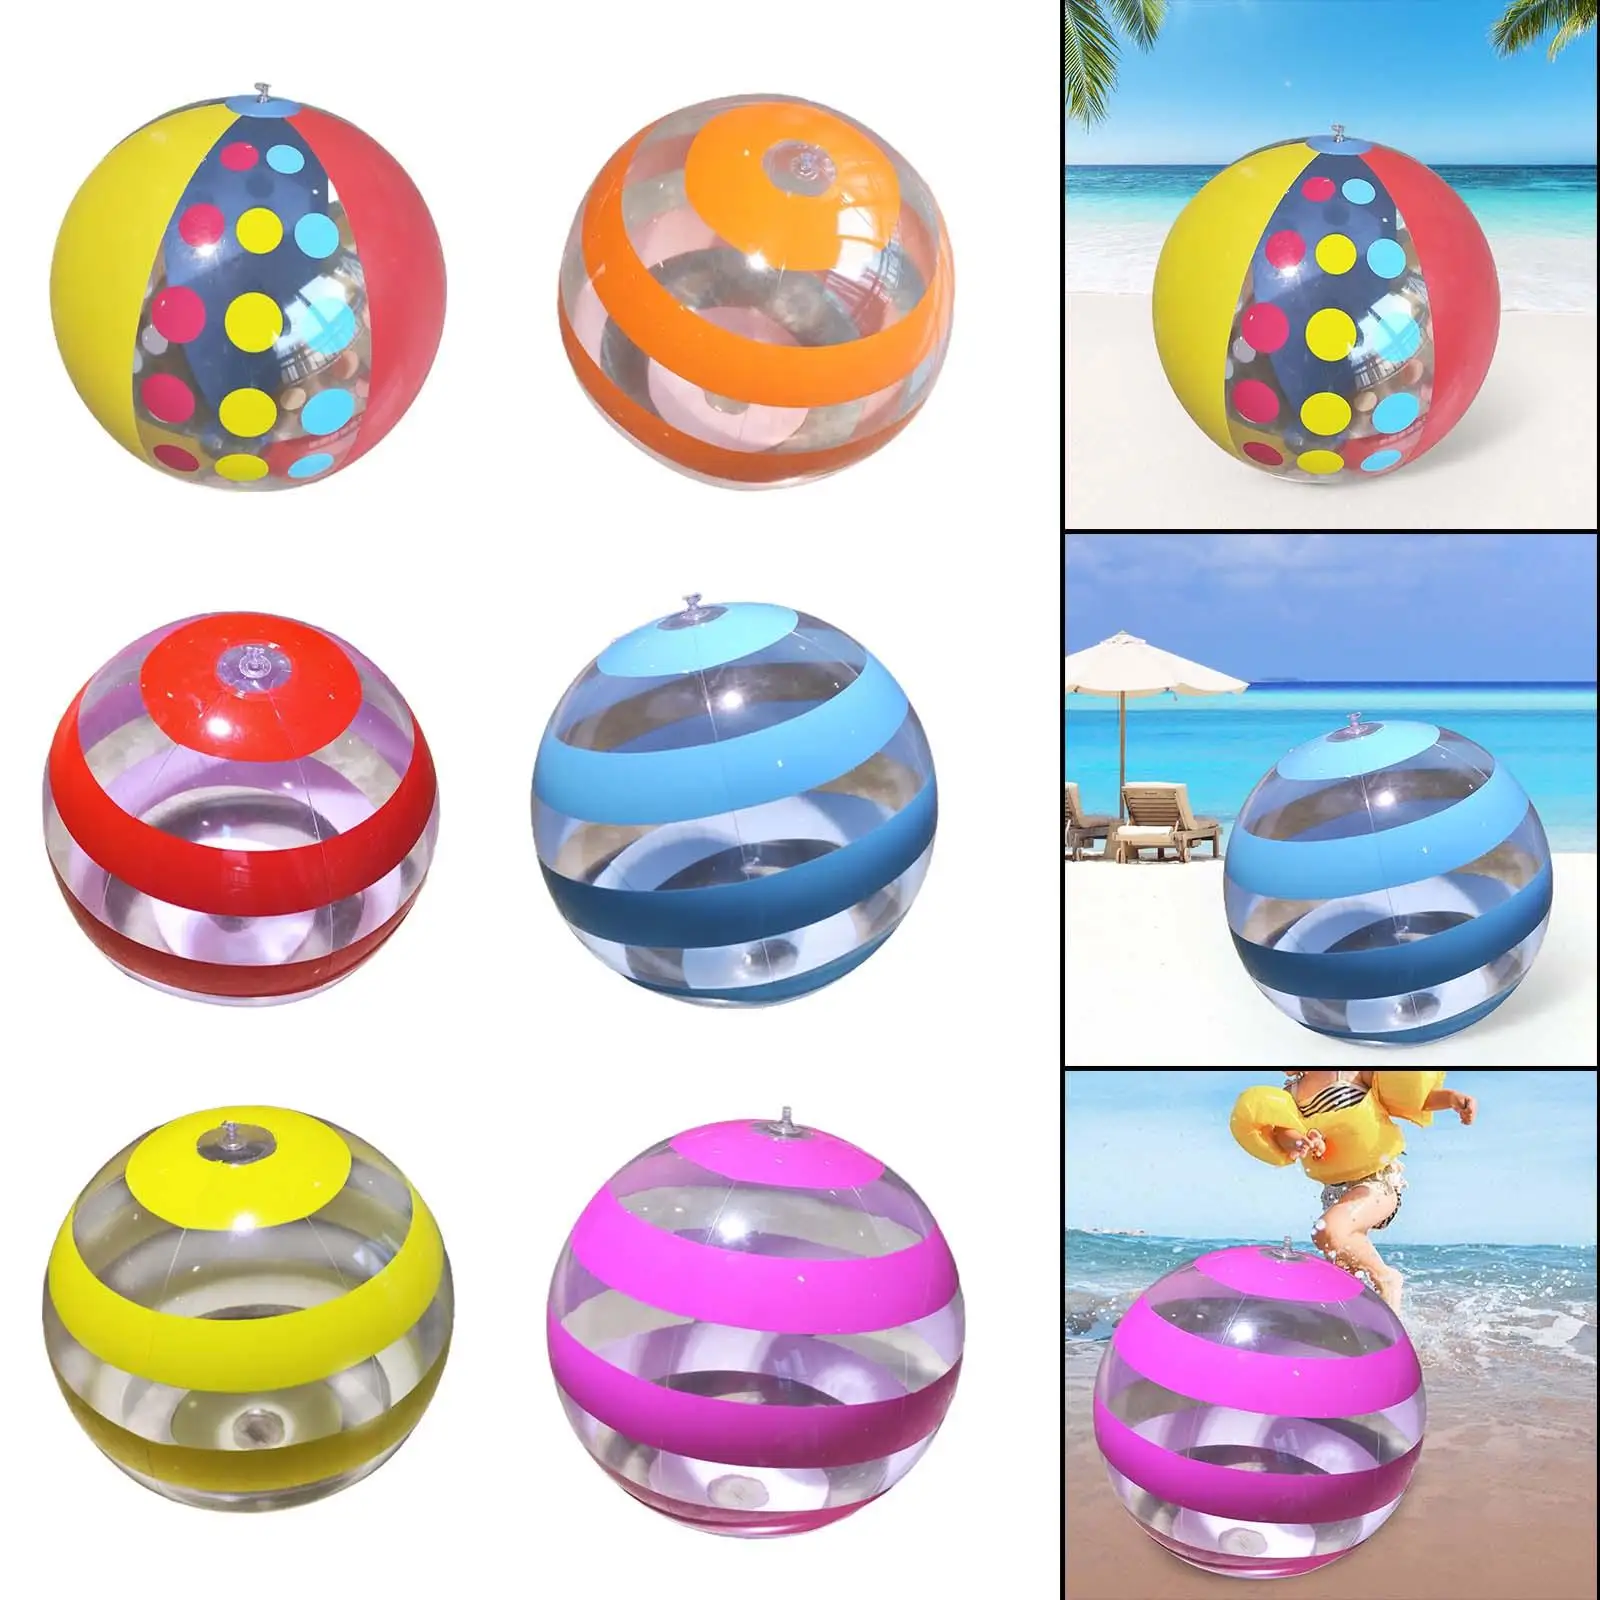 Summer Beach Ball Pool Water Games Toys 15.75`` Leakproof Inflatable Pool Toys for Home Hawaiian Theme Beach Summer Yard